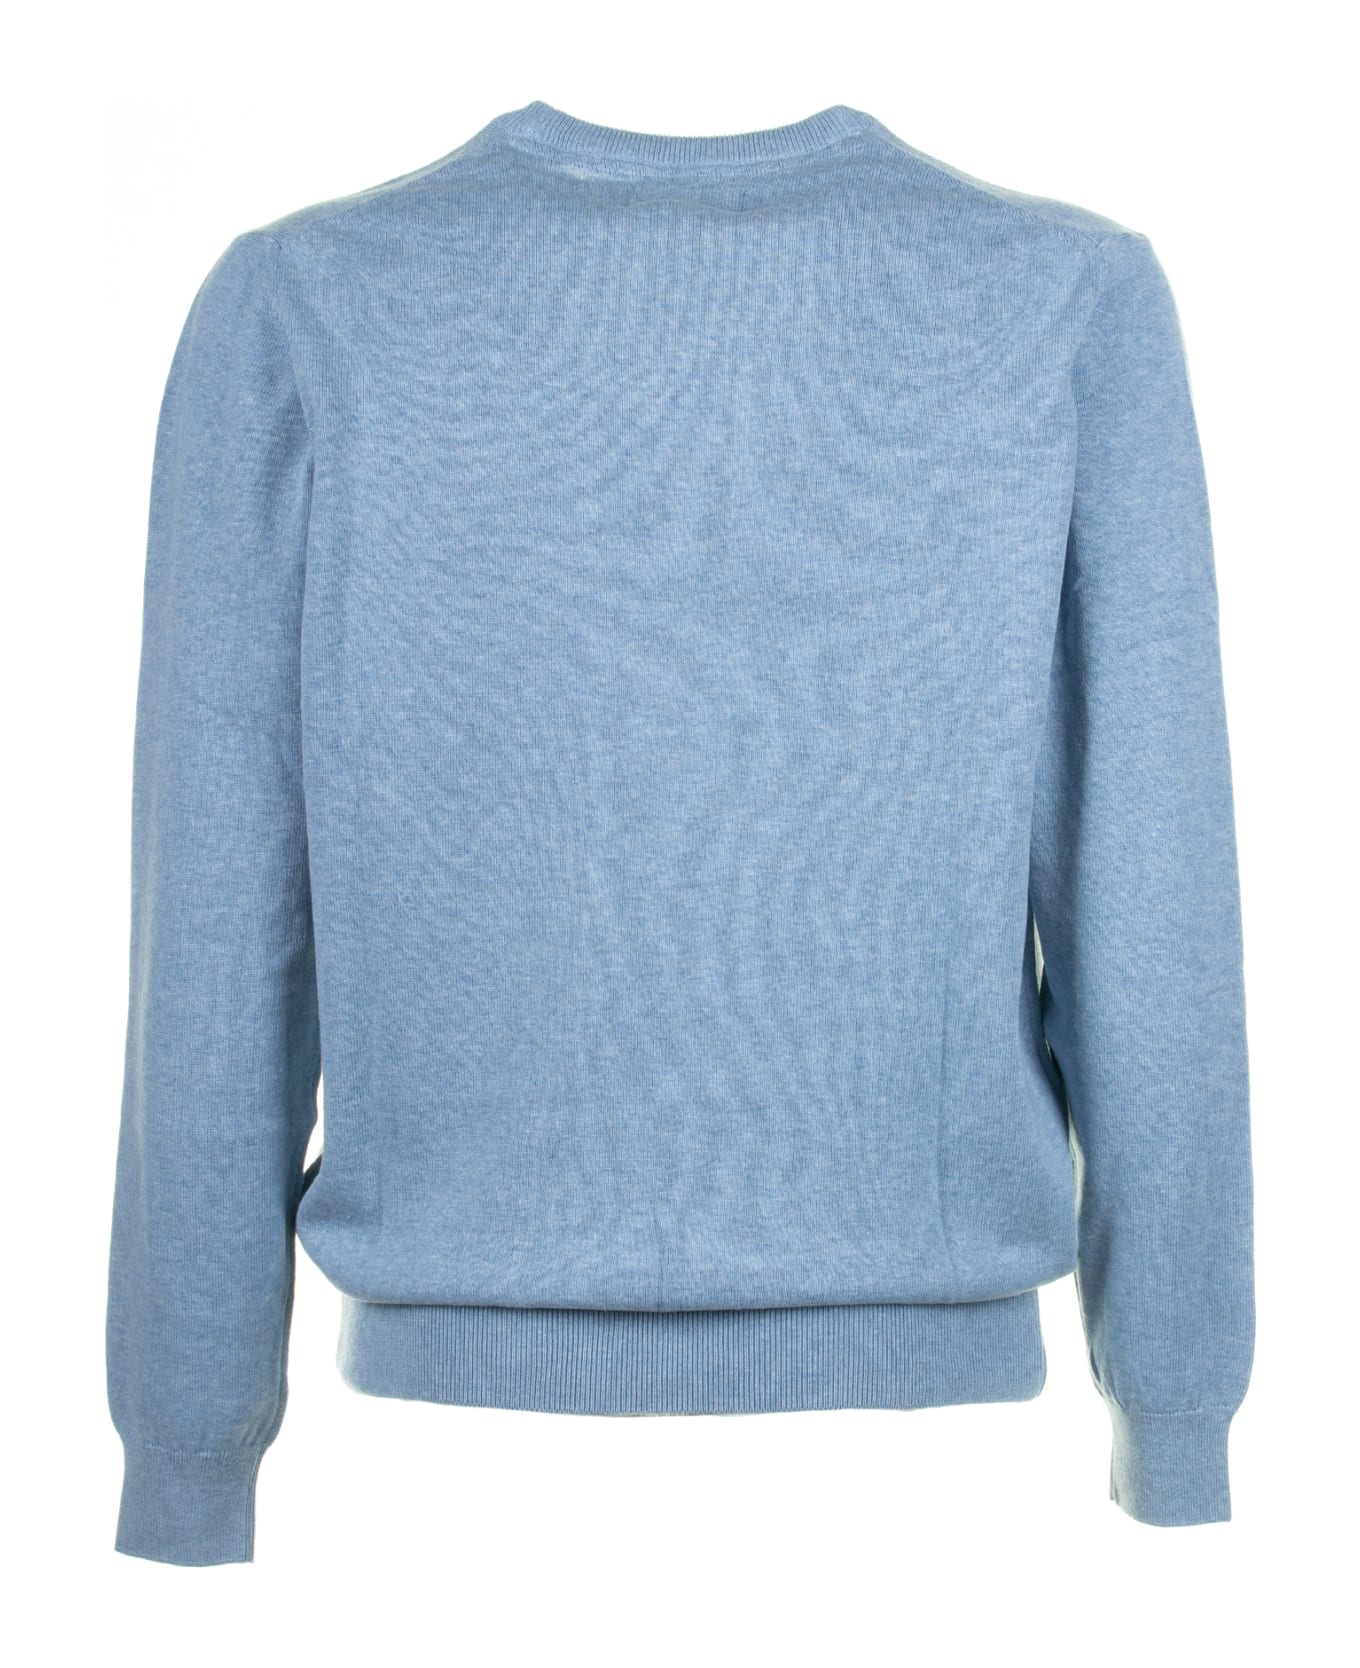 Barbour Light Blue Crew Neck Sweater - DK CHAMBRAY